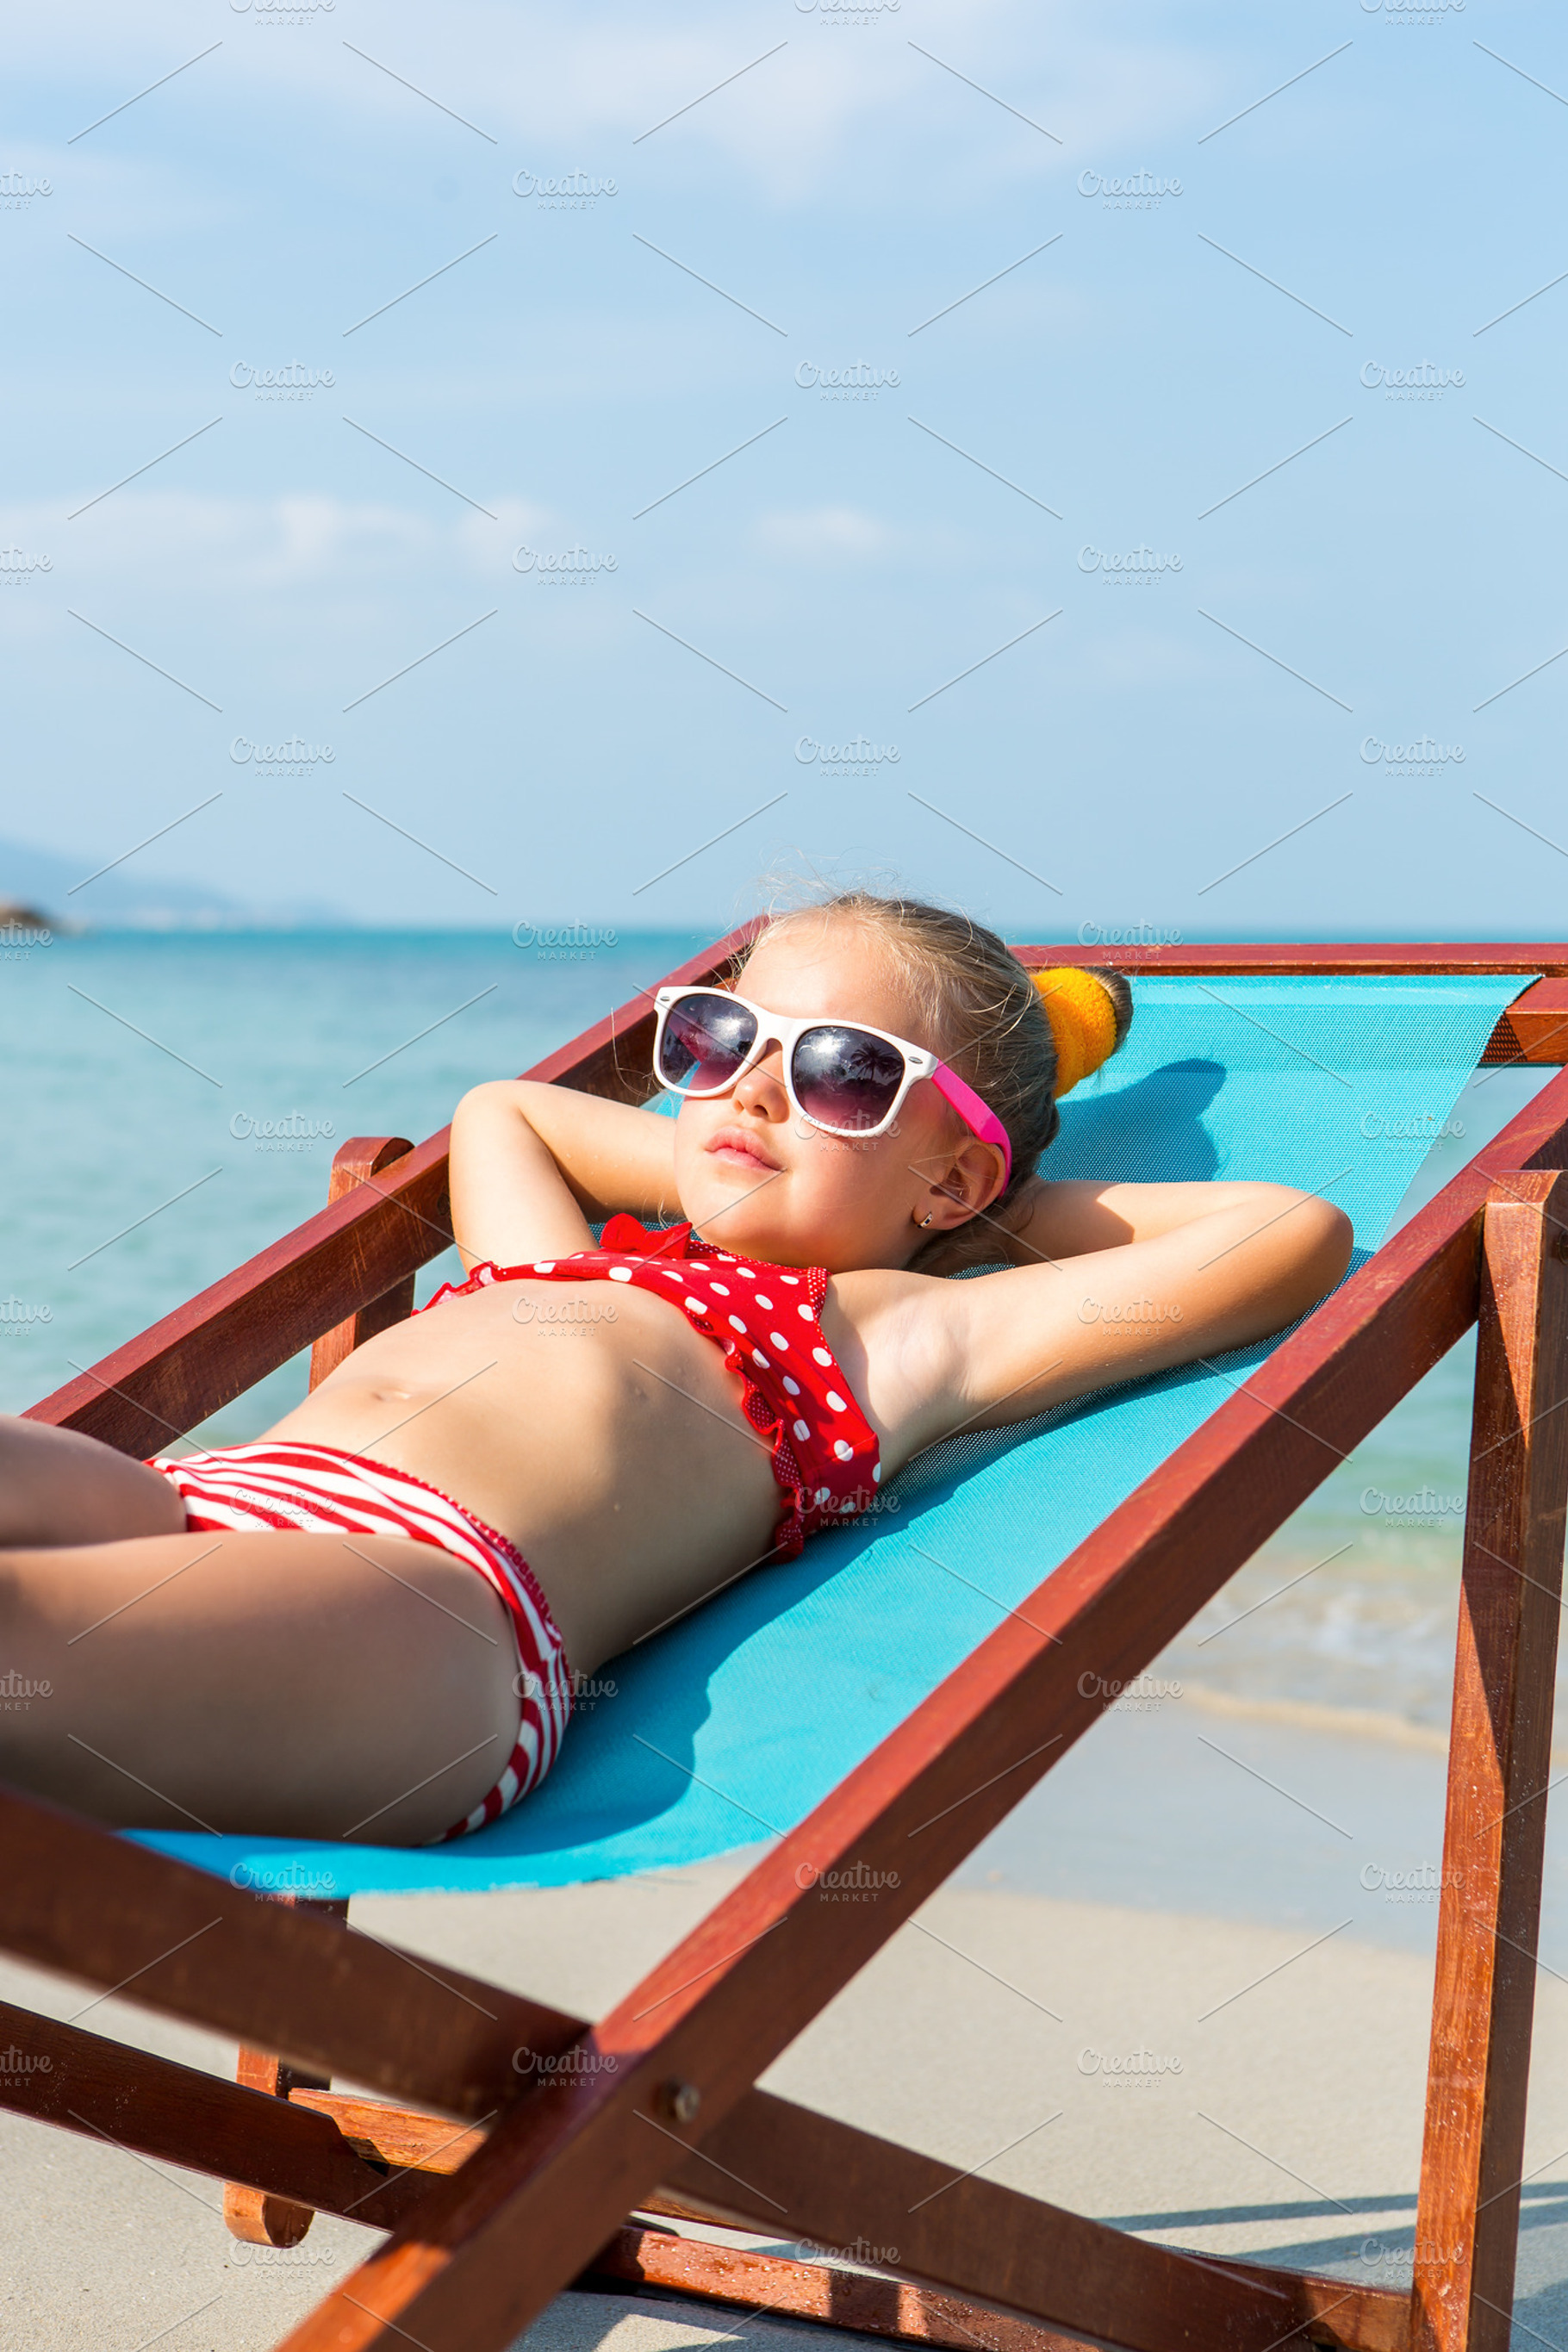 Cute Lady In Beach Chair High Quality People Images Creative